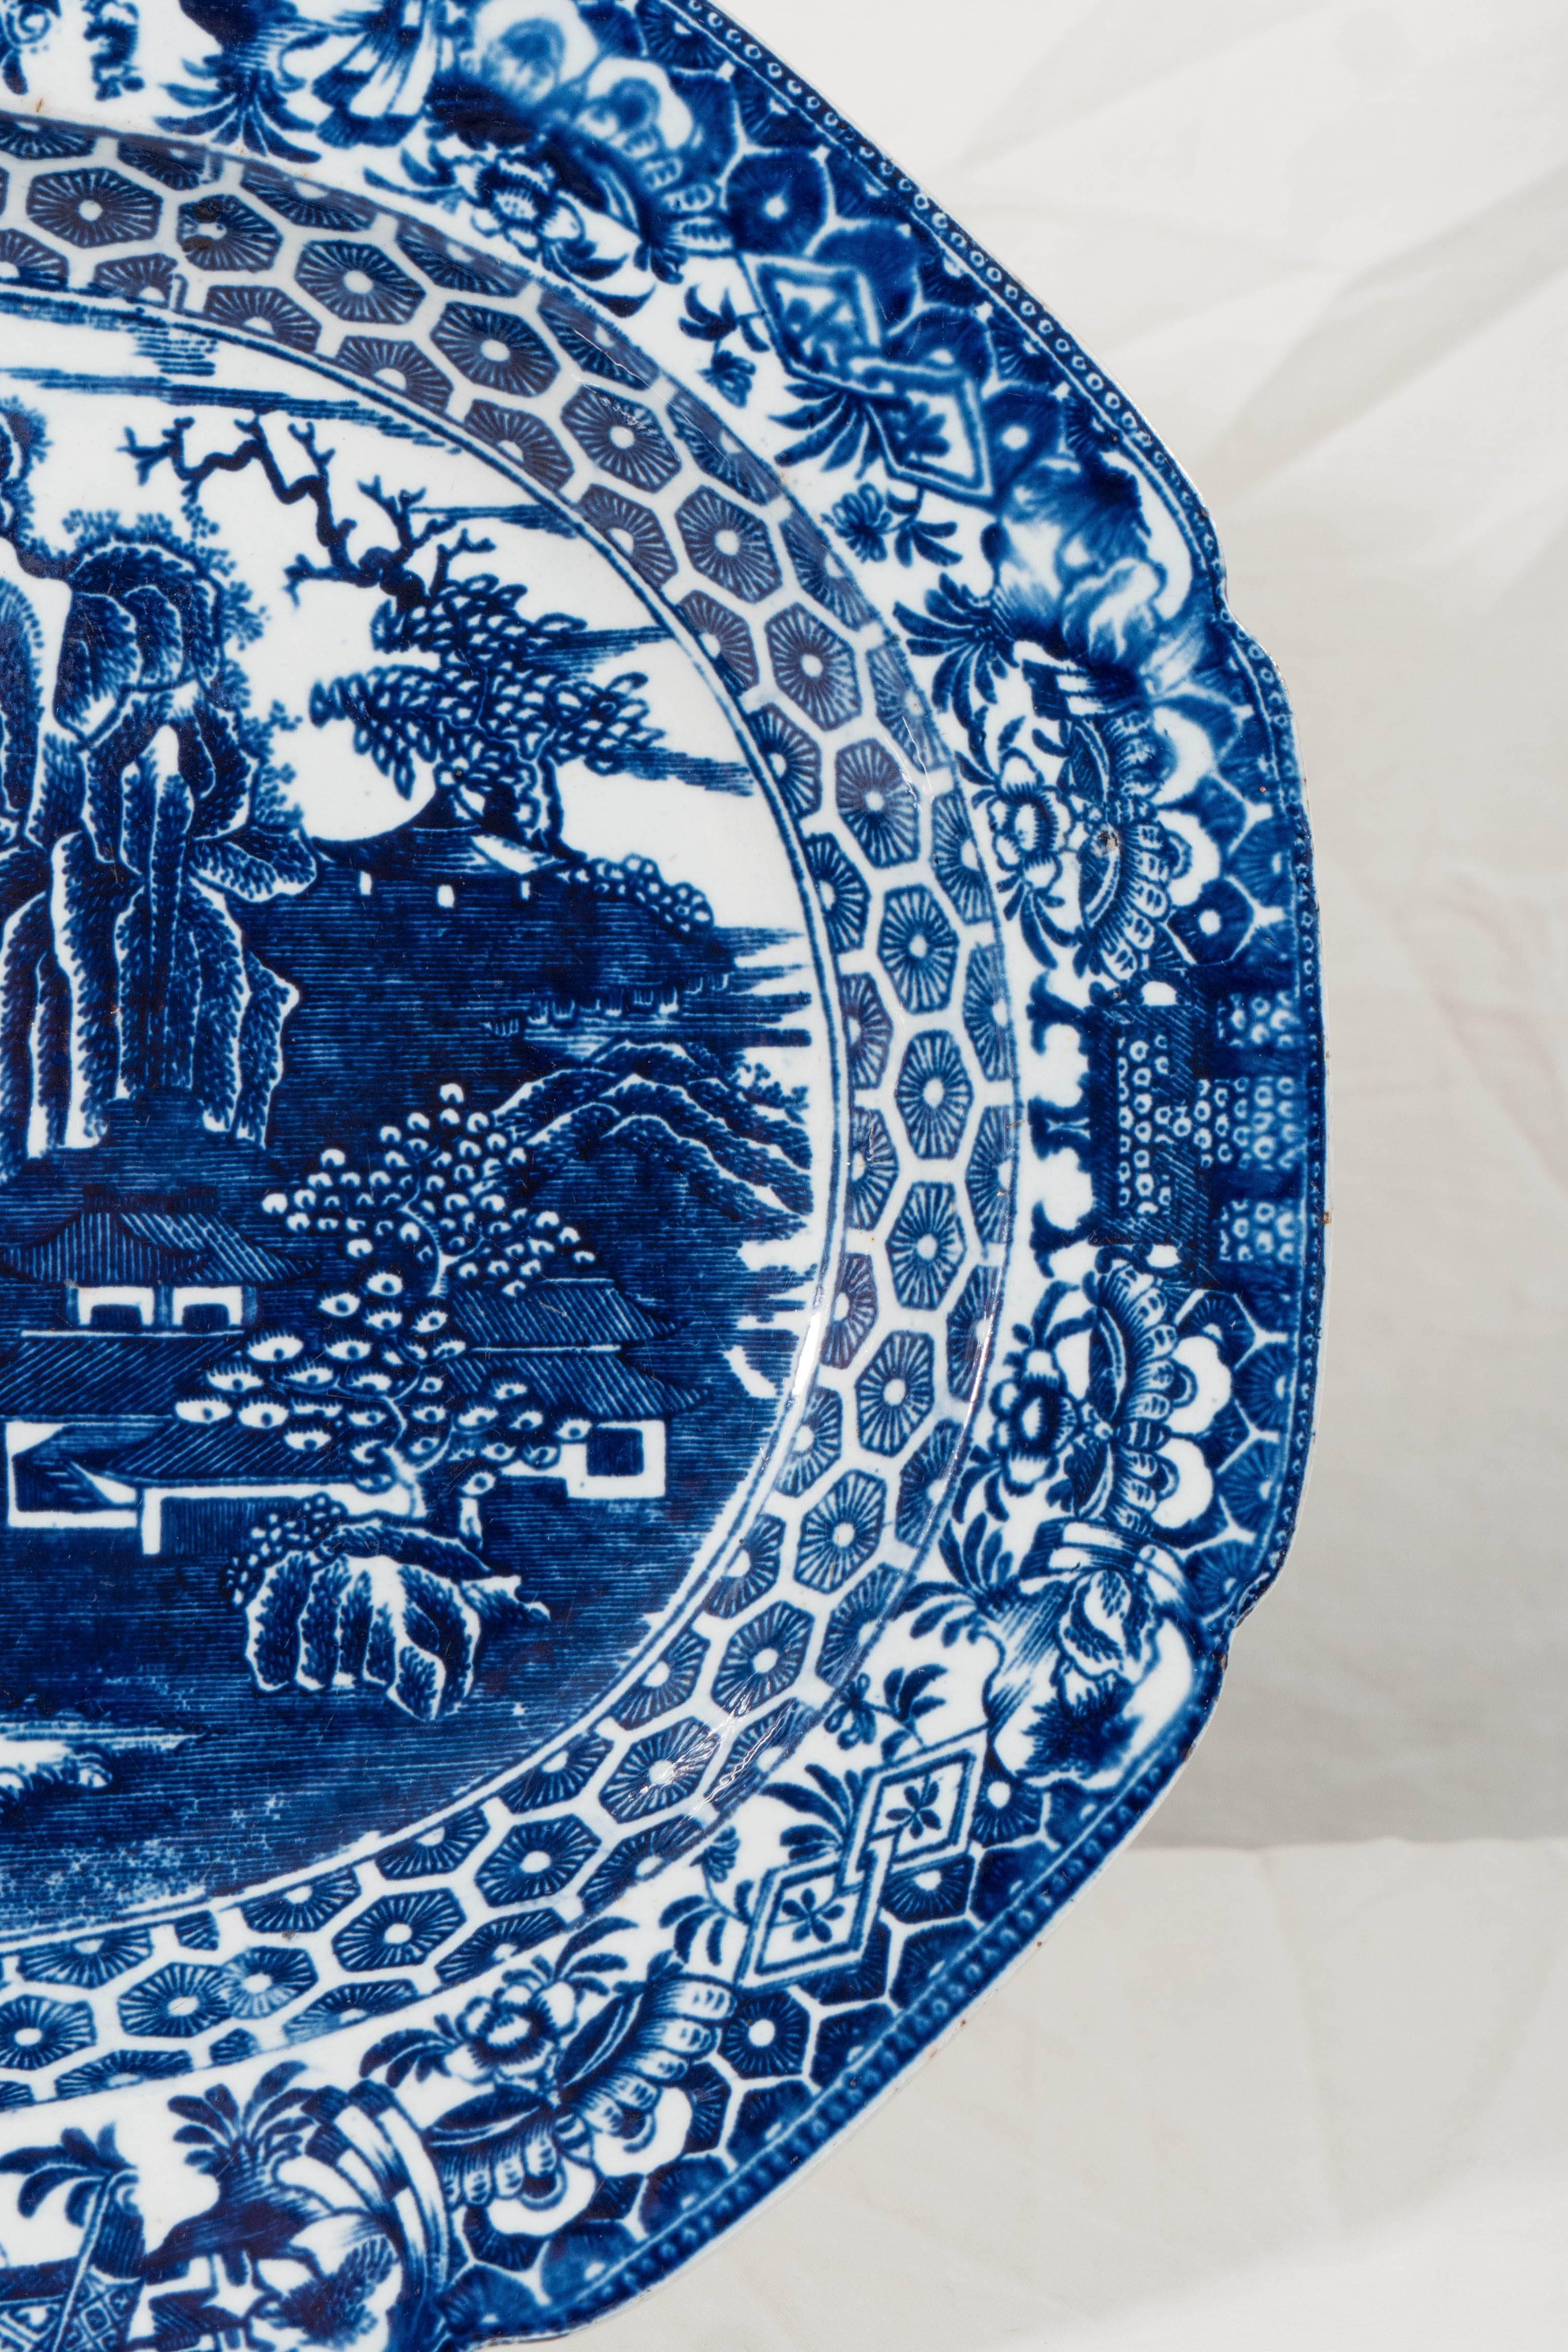 Late 18th Century English Blue and White Platter with the 